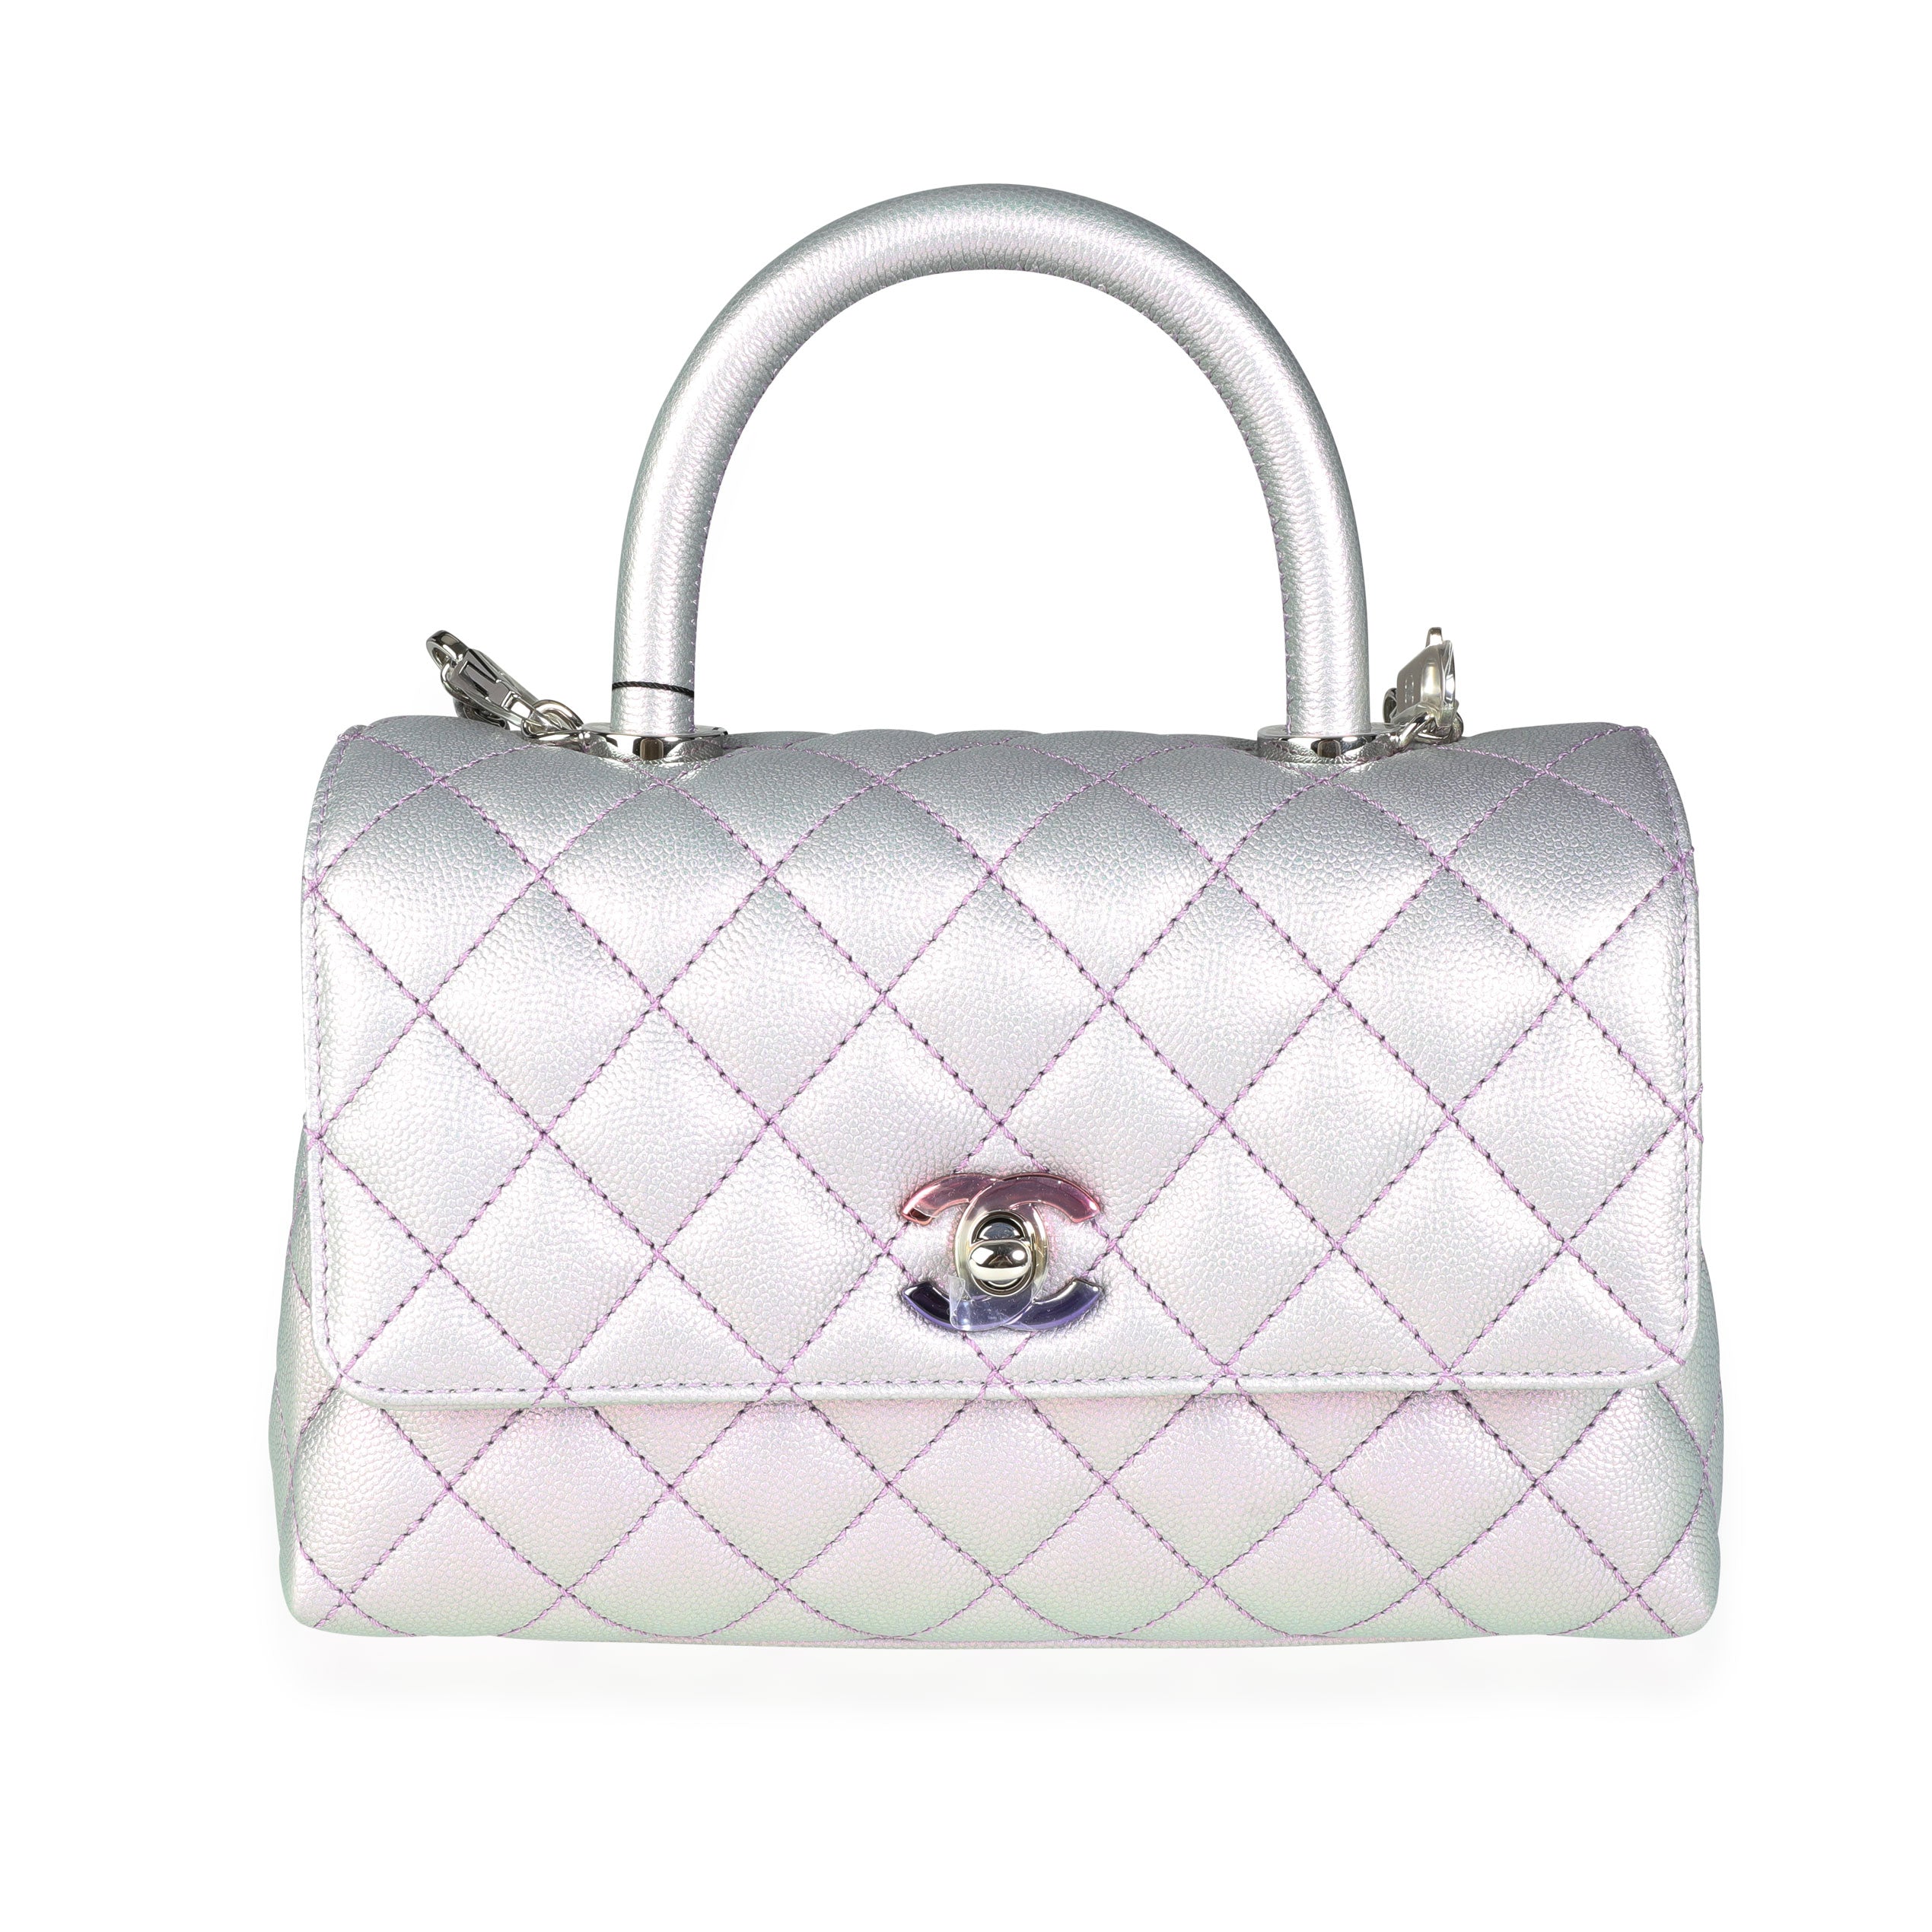 22C Chanel Small Coco Handle bag pink caviar leather